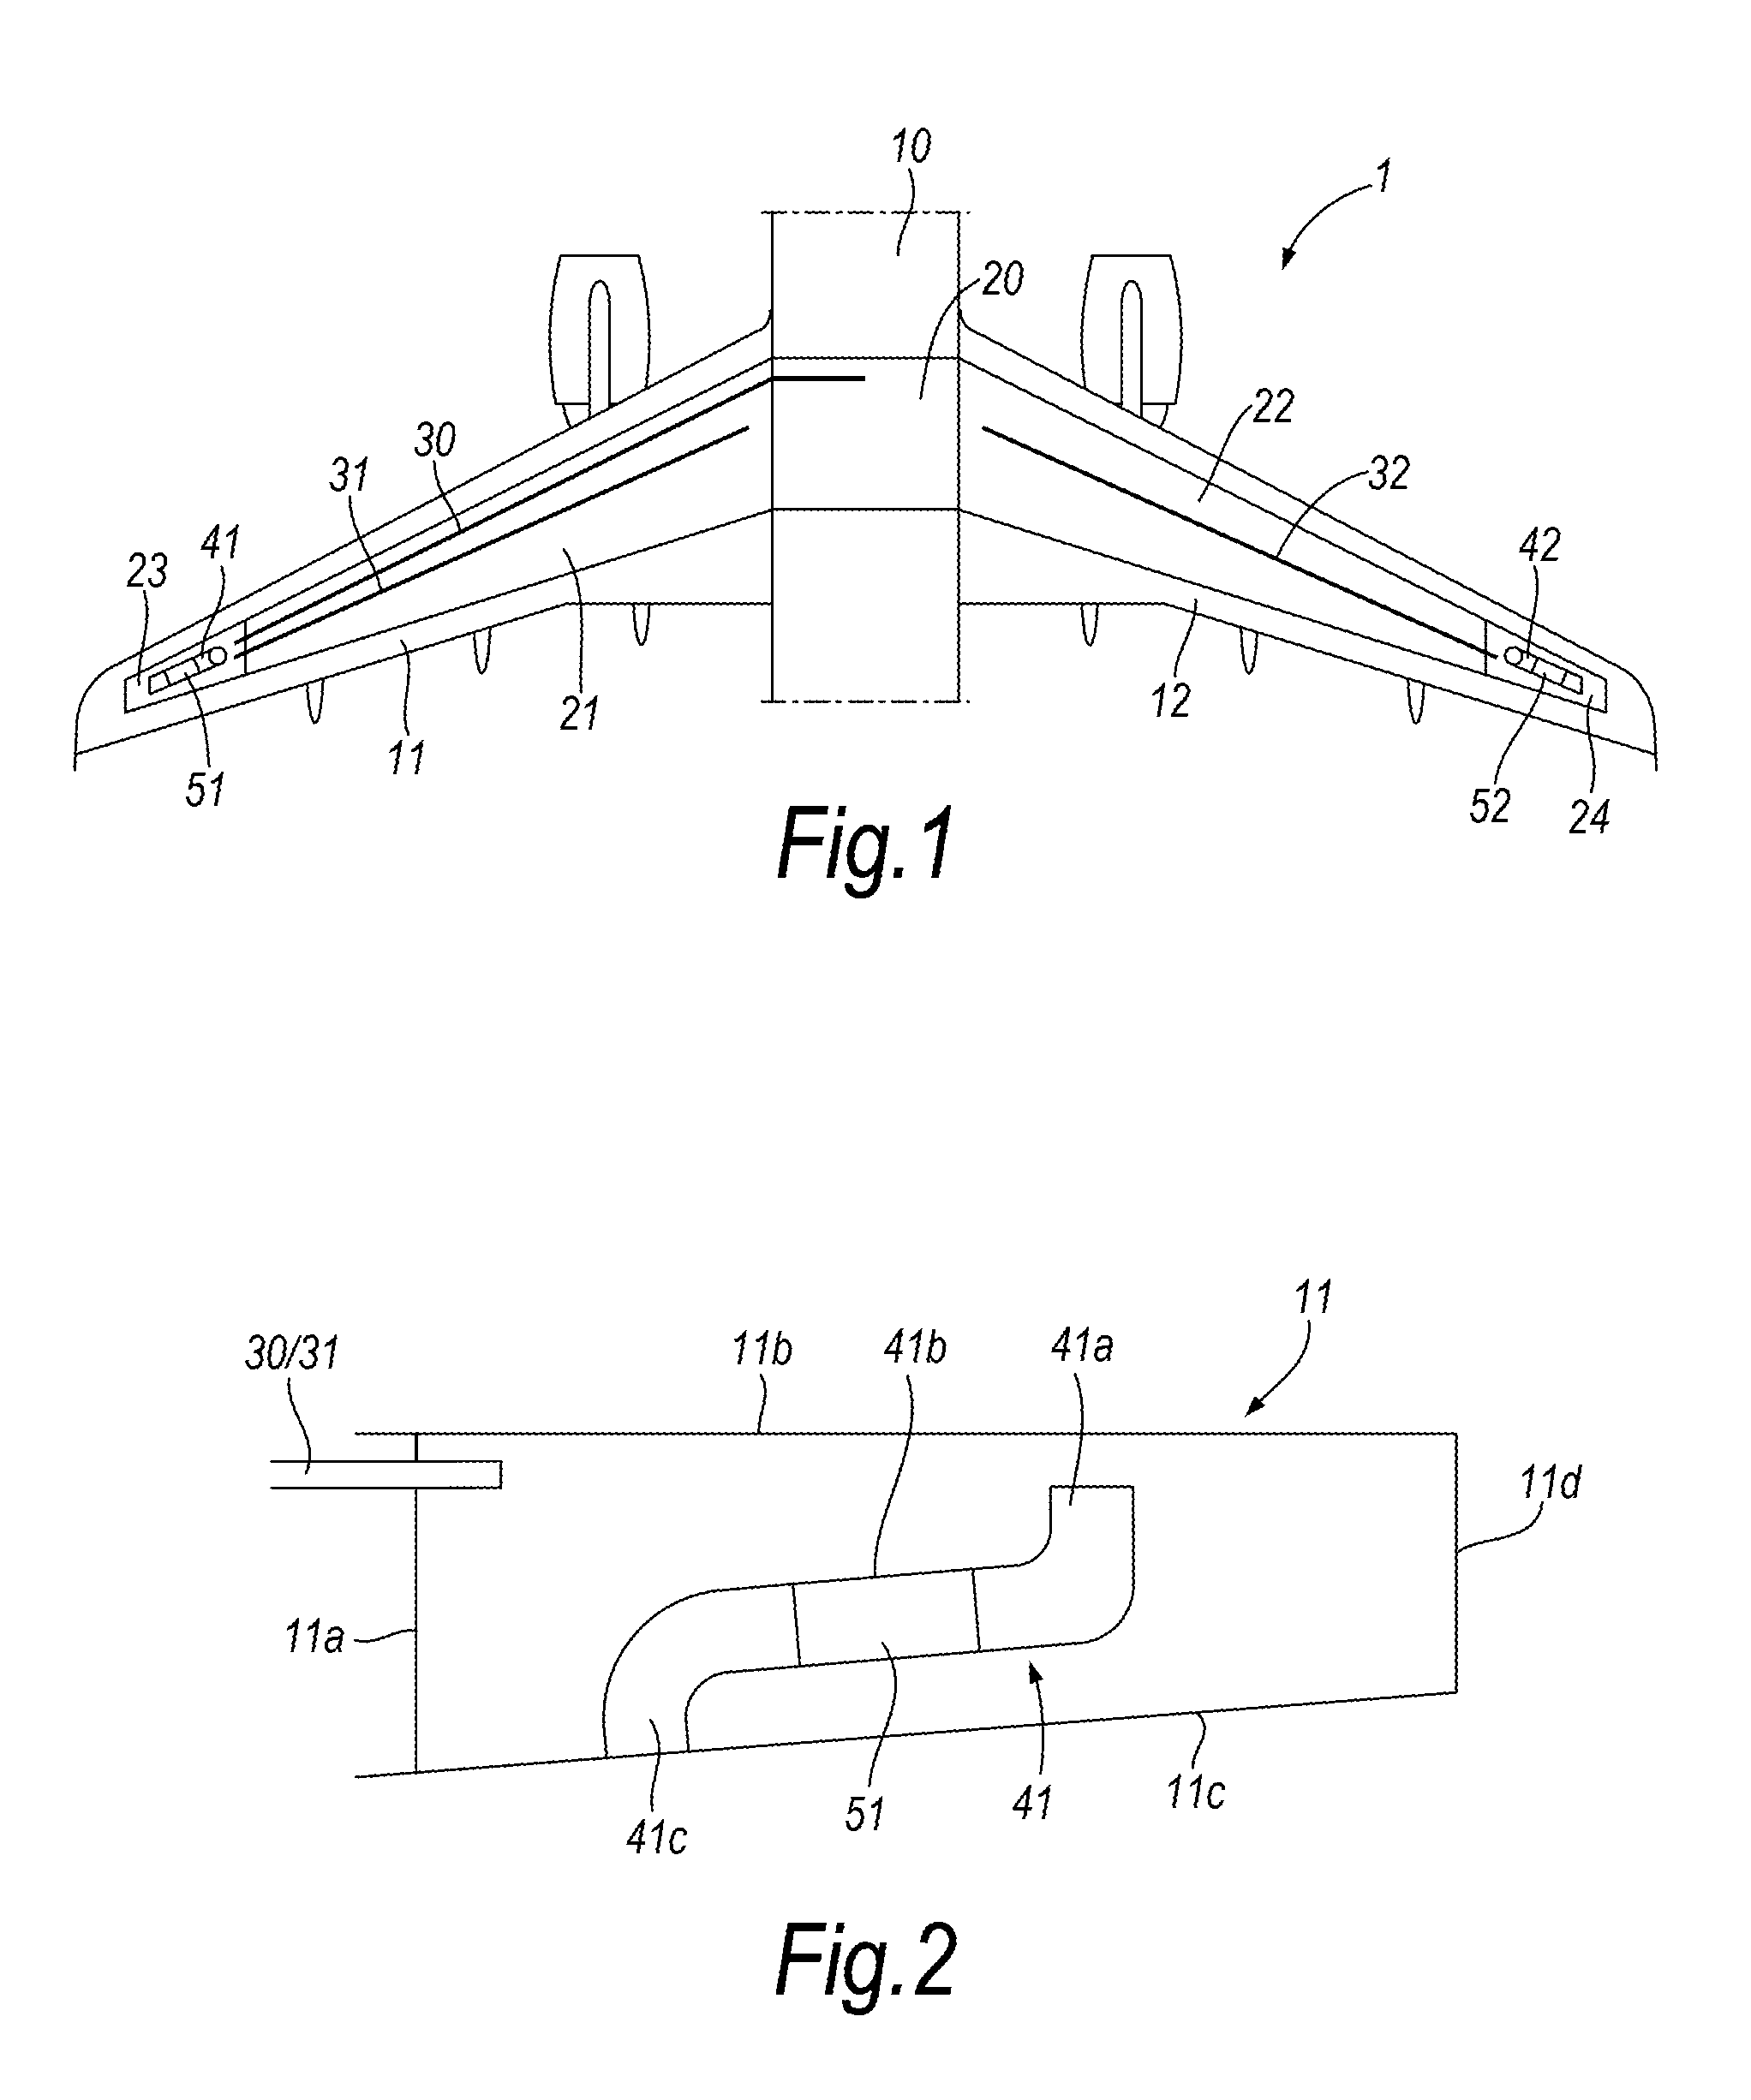 Flame trap cartridge, flame arrestor, method of preventing flame propagation into a fuel tank and method of operating an aircraft